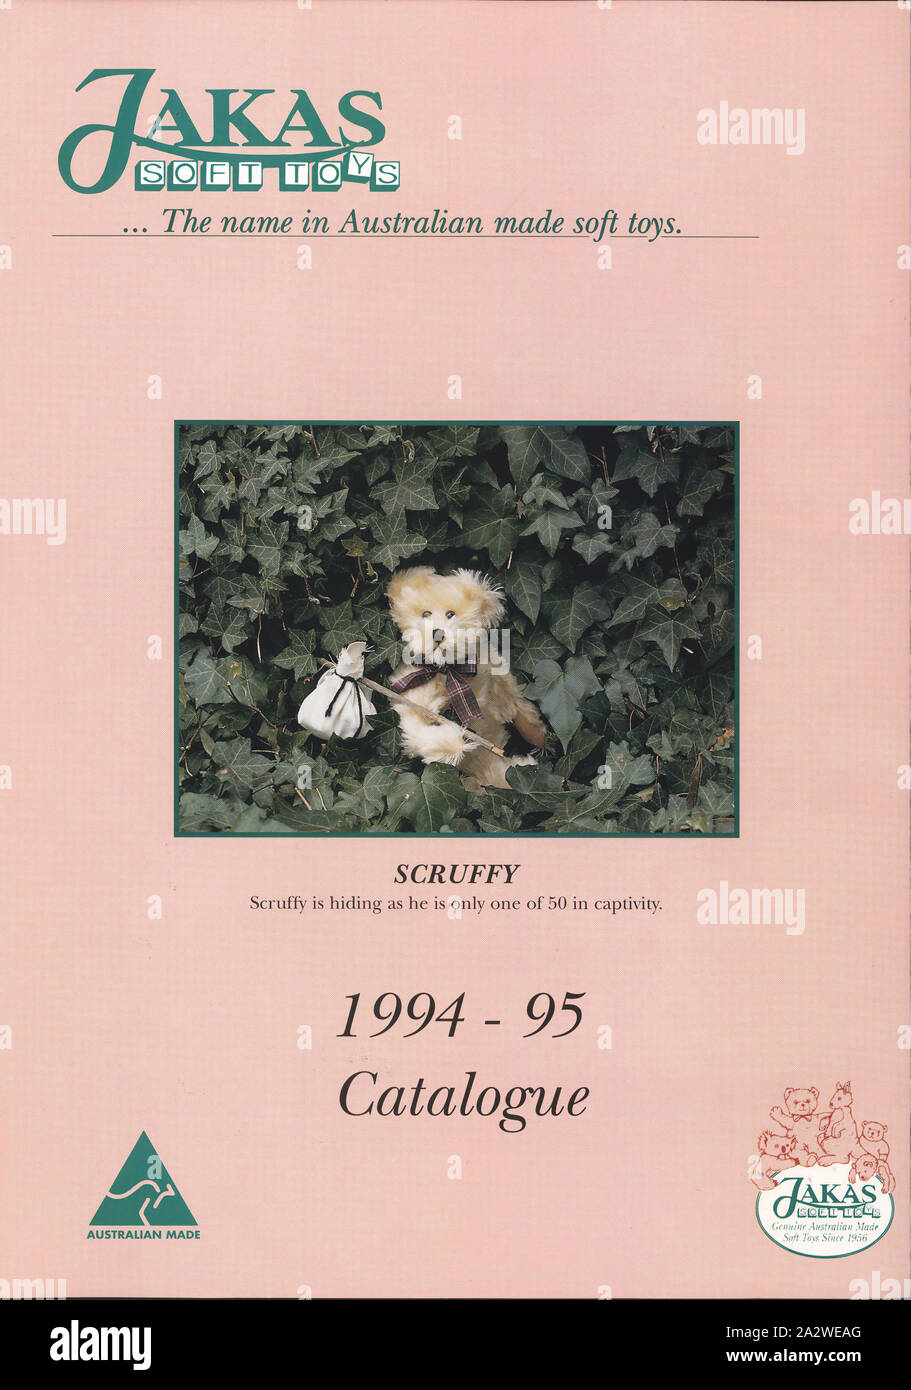 Catalogue - Jakas Soft Toys, Melbourne, 1994-1995, Jakas Soft Toys 1994-95 catalogue. The catalogue shows colour images of the various soft toys available with descriptions of Name, Size, Colour, Fabric and what is included with each toy. Jakas Soft Toys was a Melbourne-based company which designed and manufactured genuine high quality soft toys from 1956. Their range included teddy bears, golliwogs, animals and birds. Jakas Soft Toys ceased Stock Photo